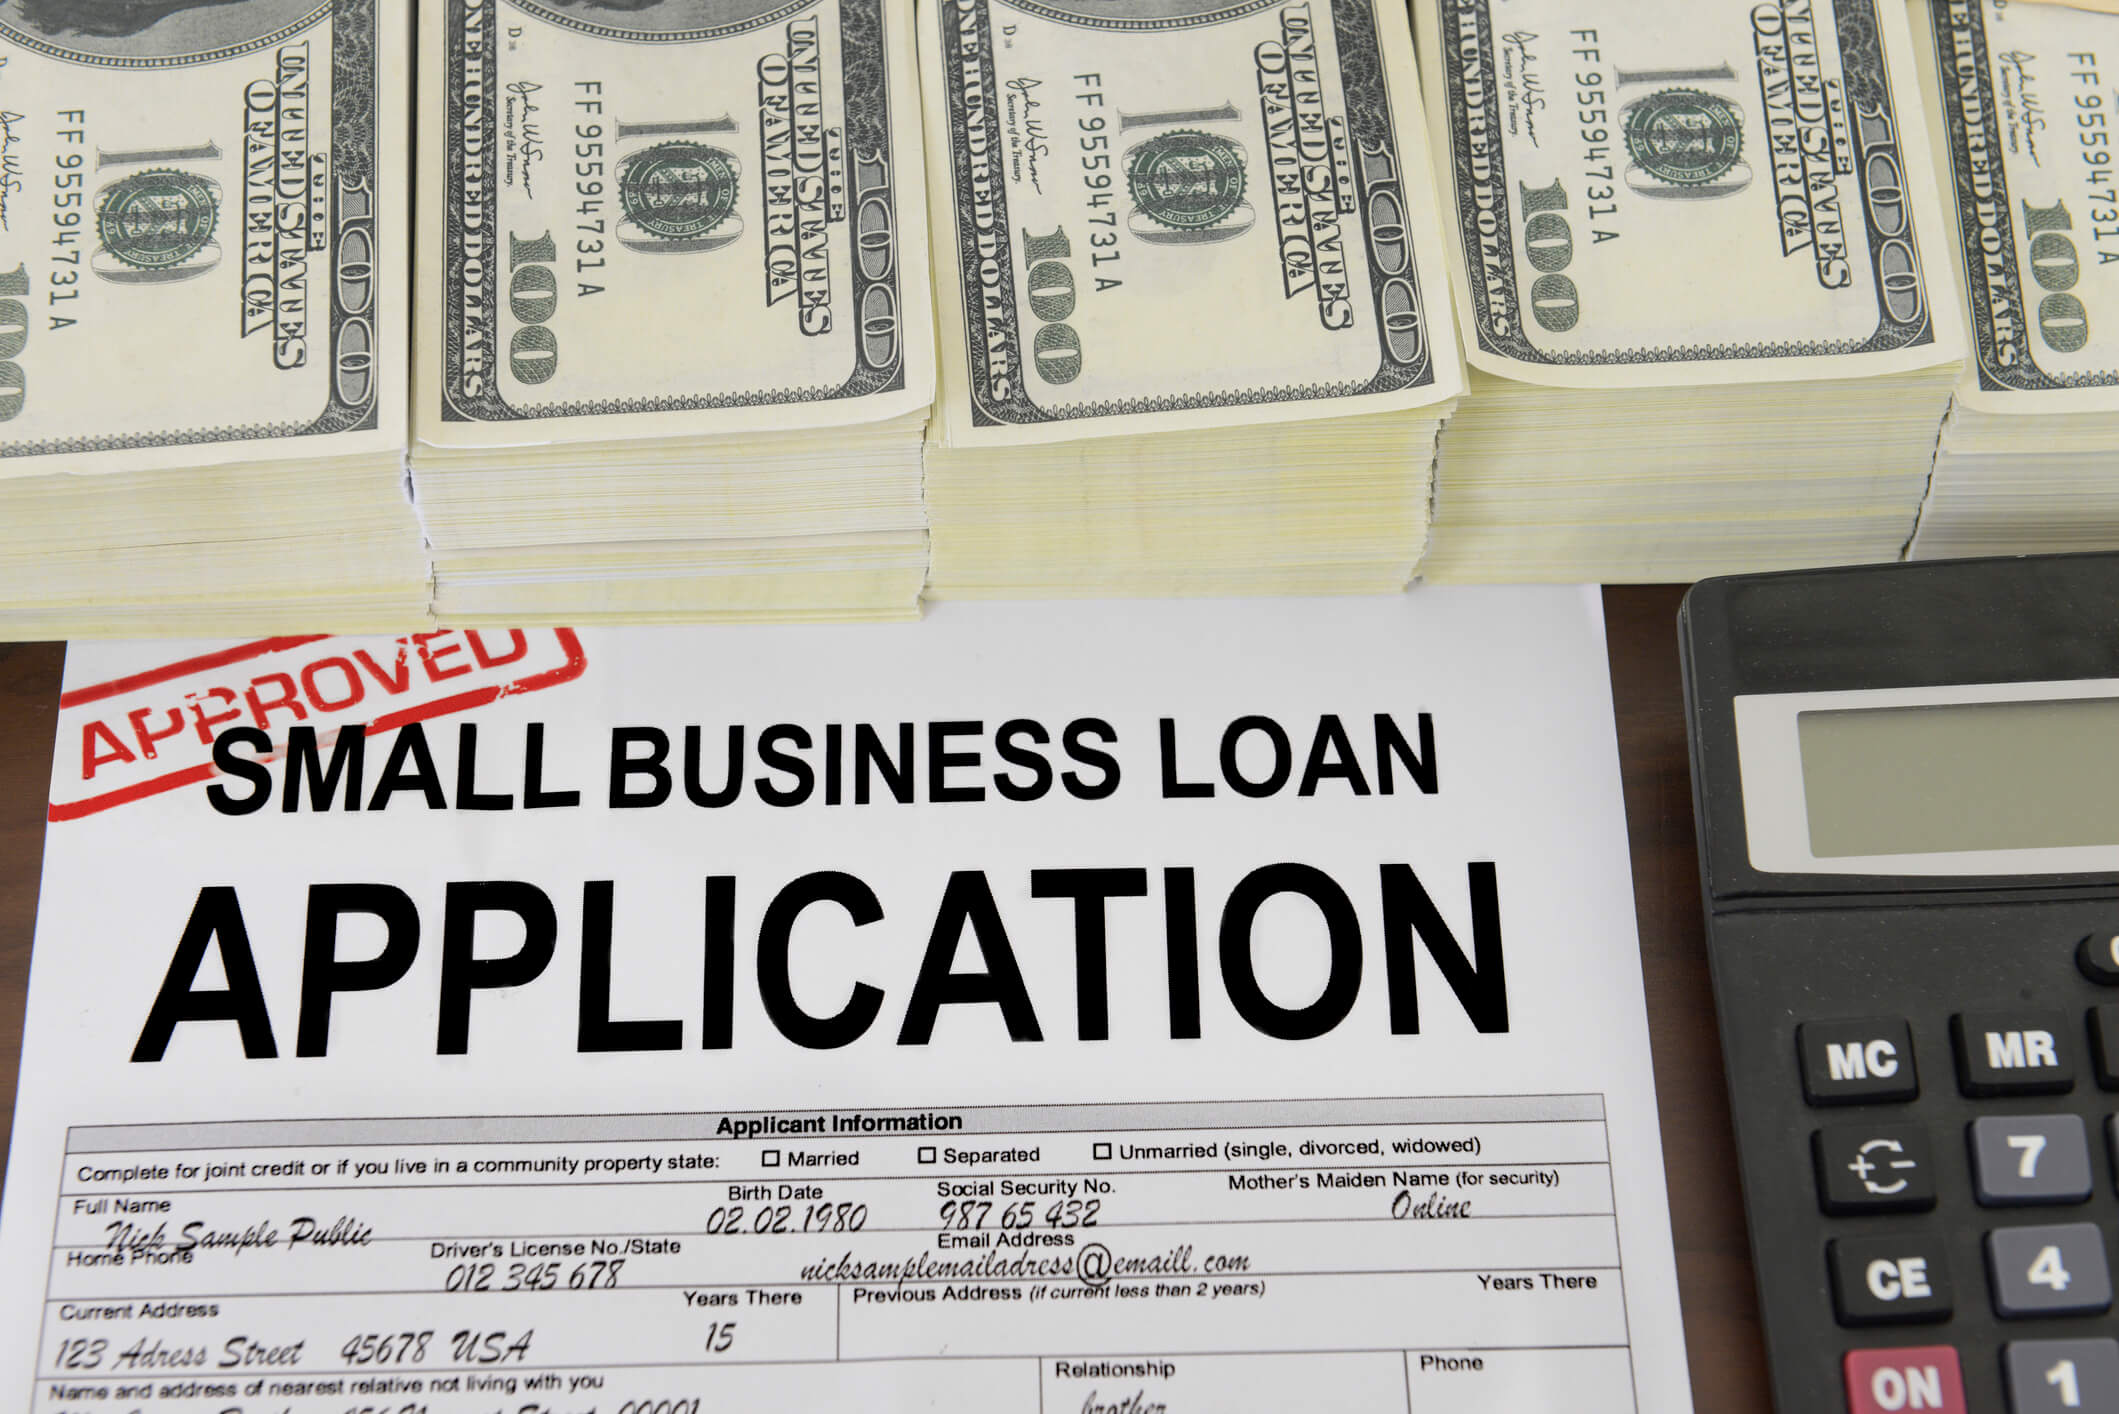 Small Business Loan - Complete Controller